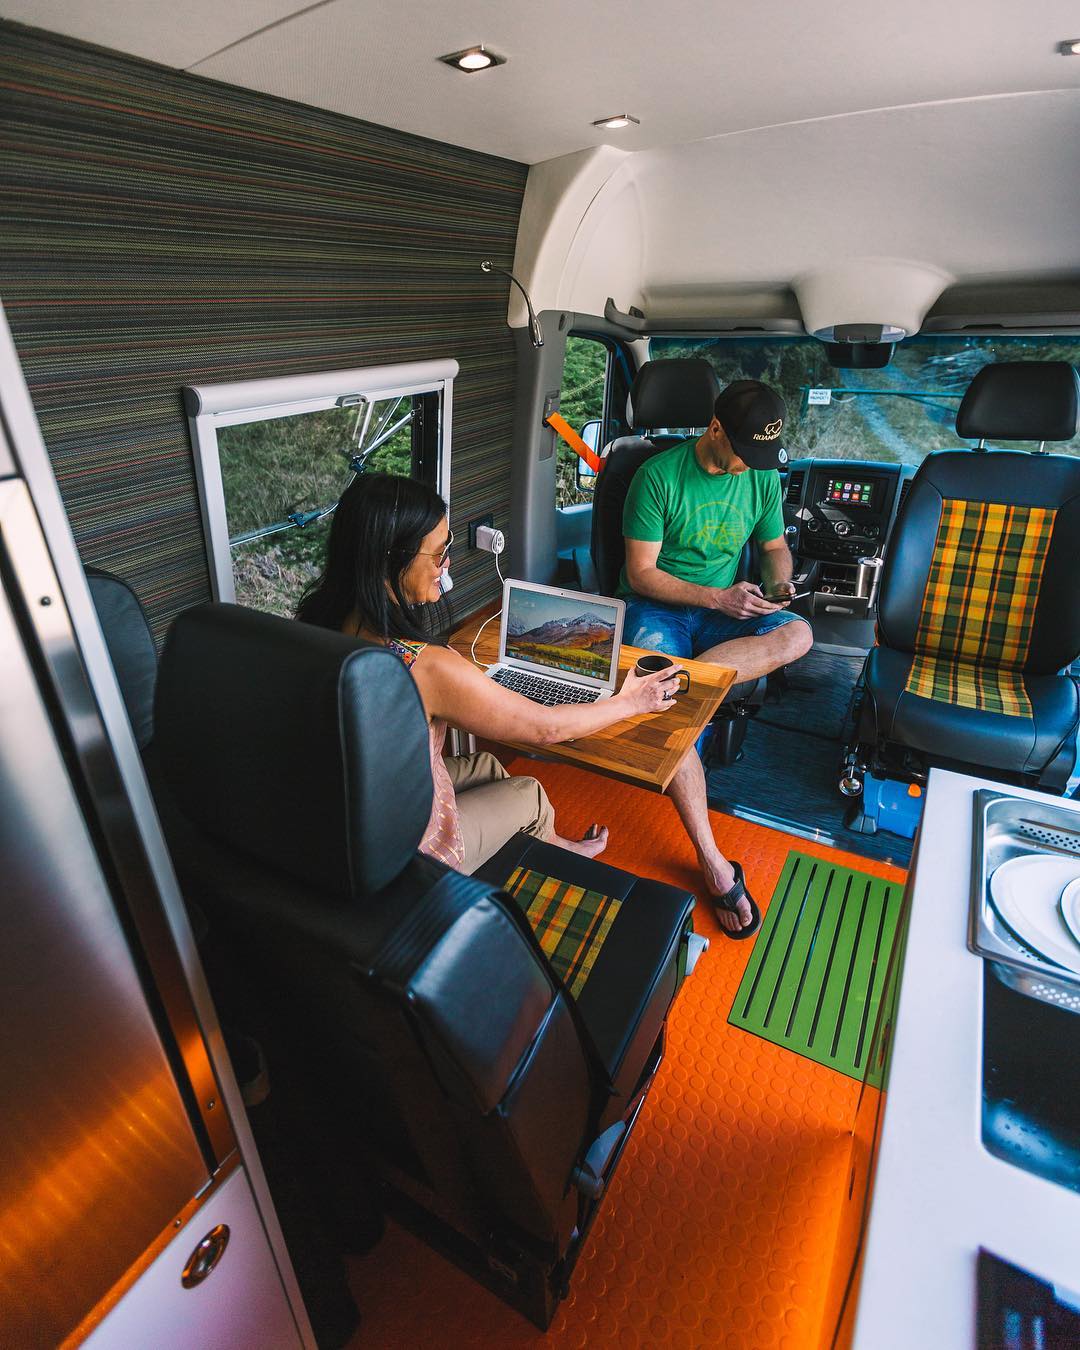 getting internet on the road and working as a digital nomad in a campervan conversion or RV